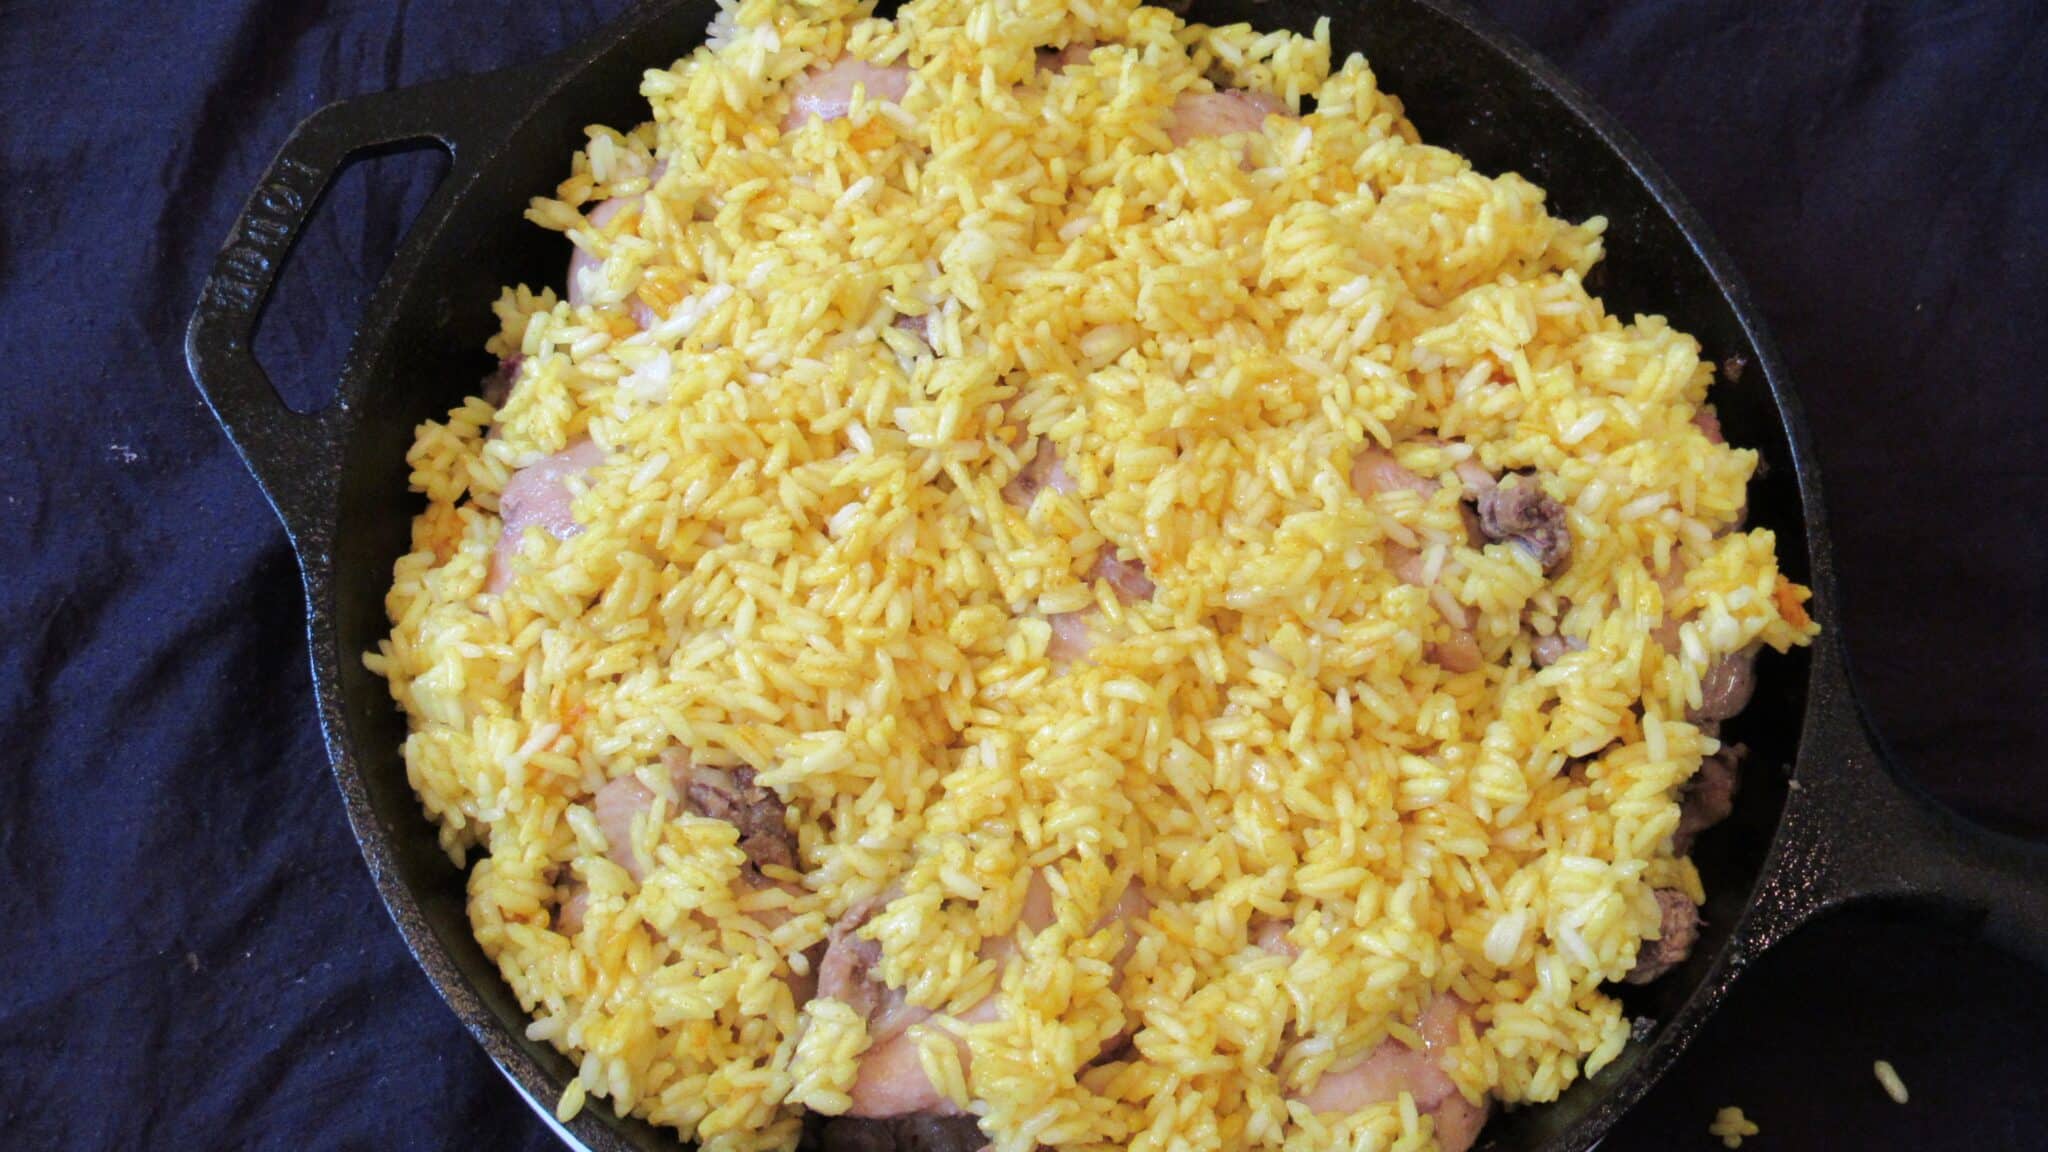 Turmeric rice is layered over the chicken cuts on a cast-iron skillet.